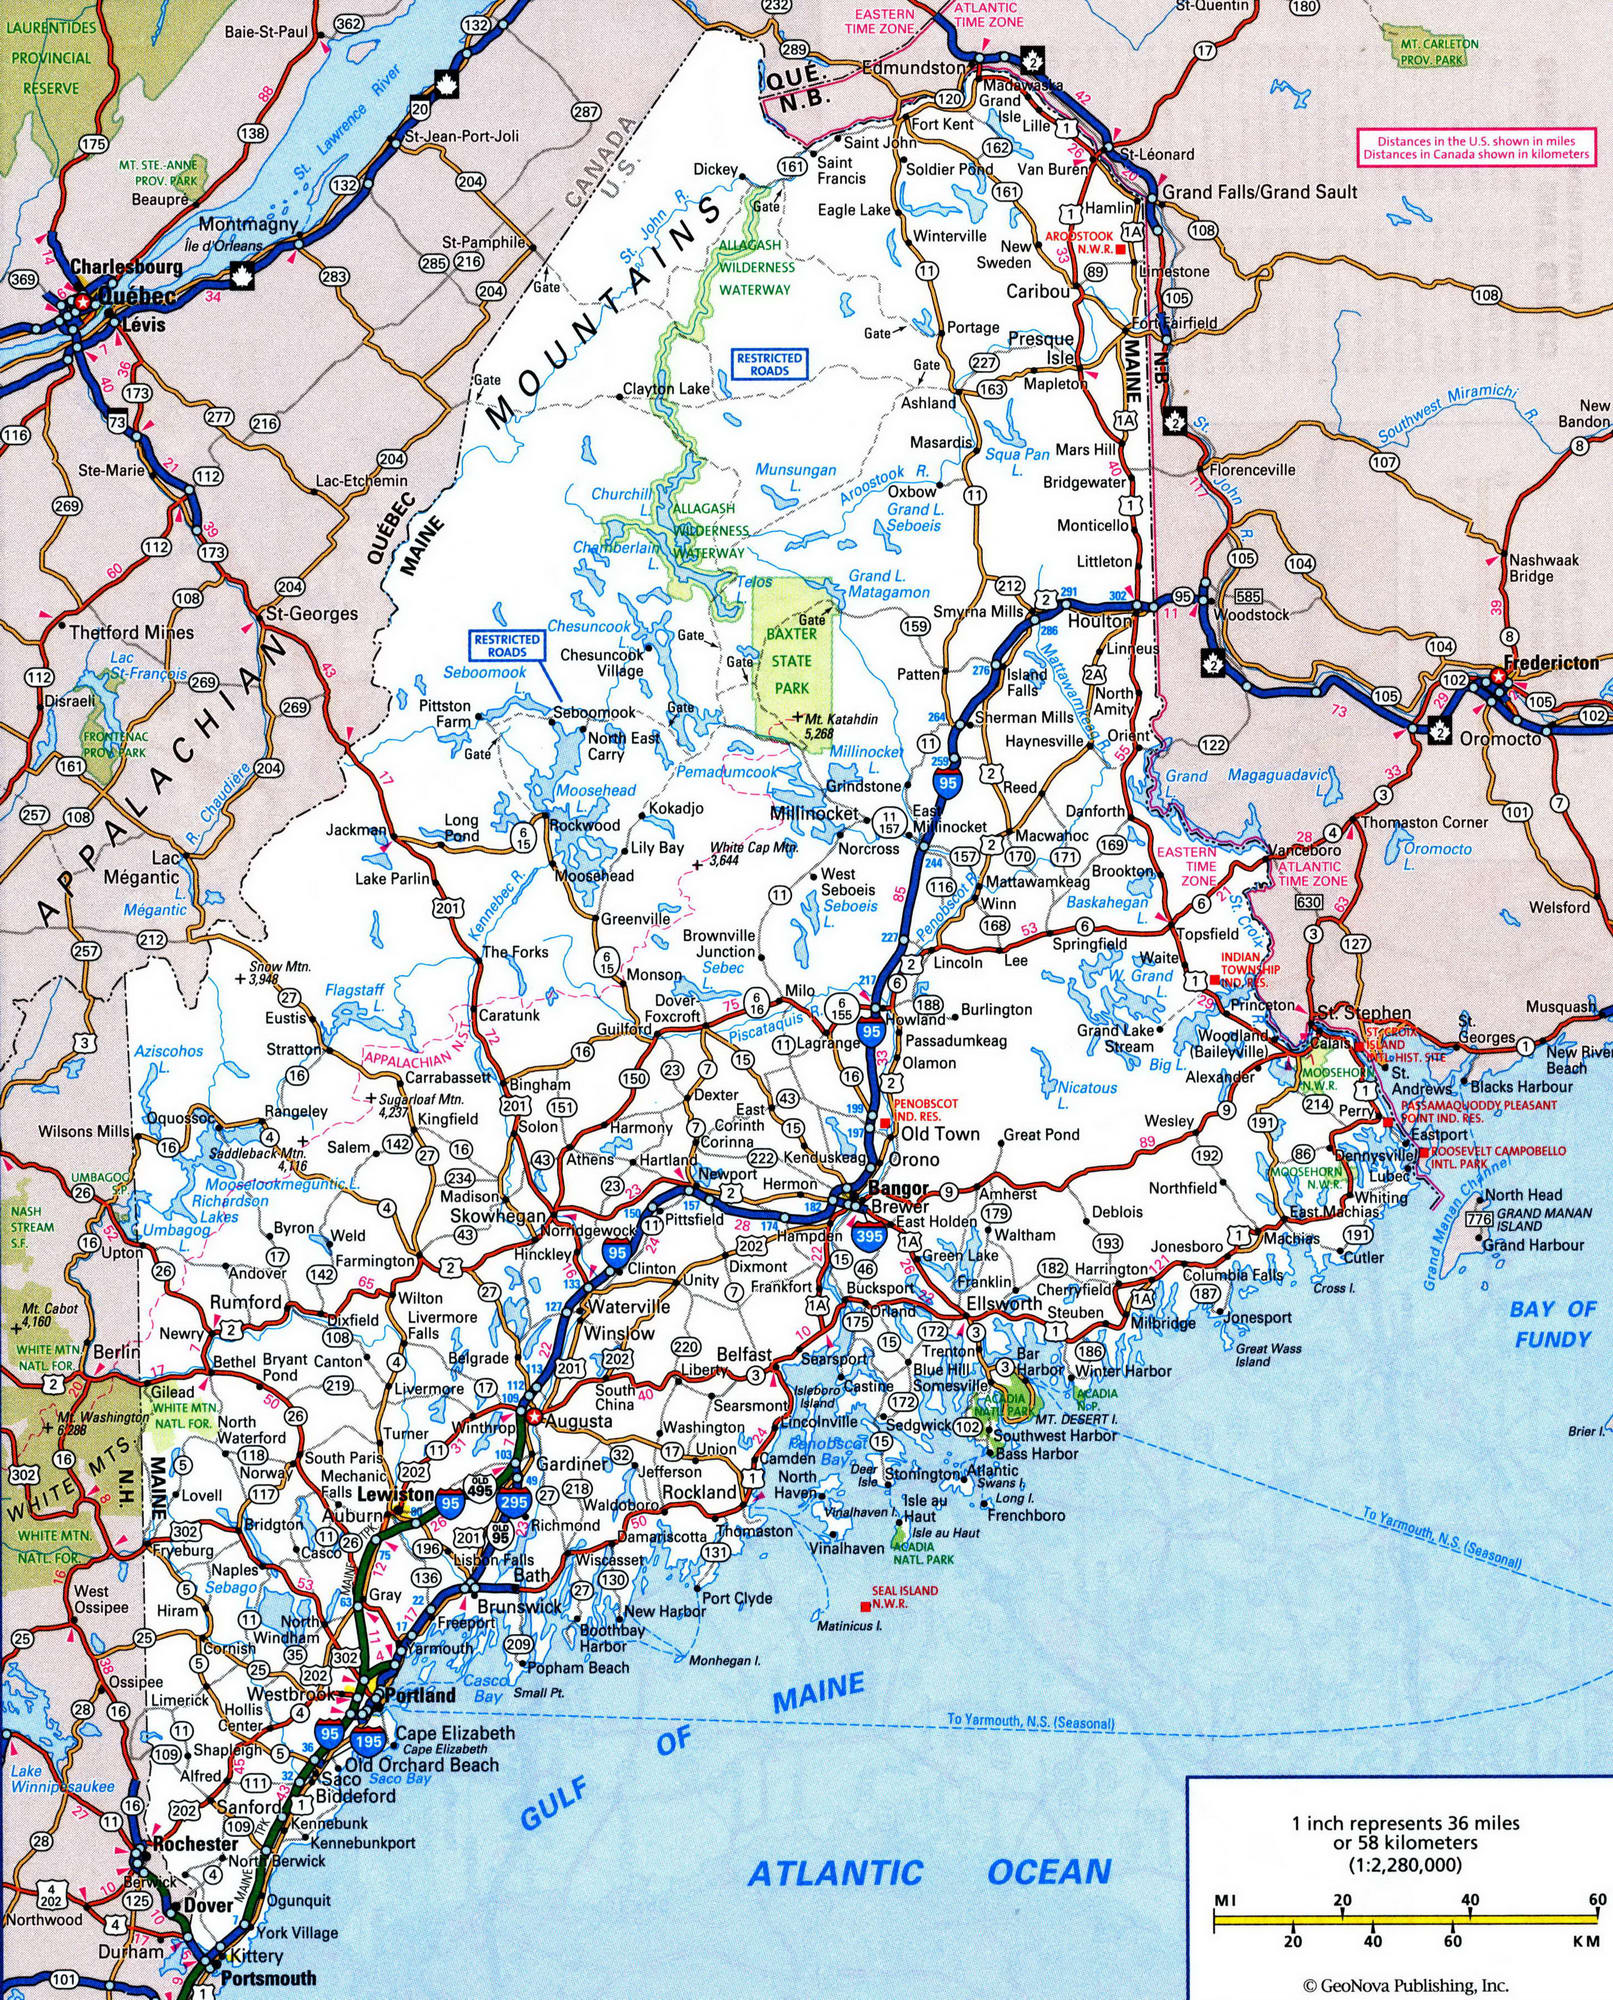 Detailed roads map of Maine